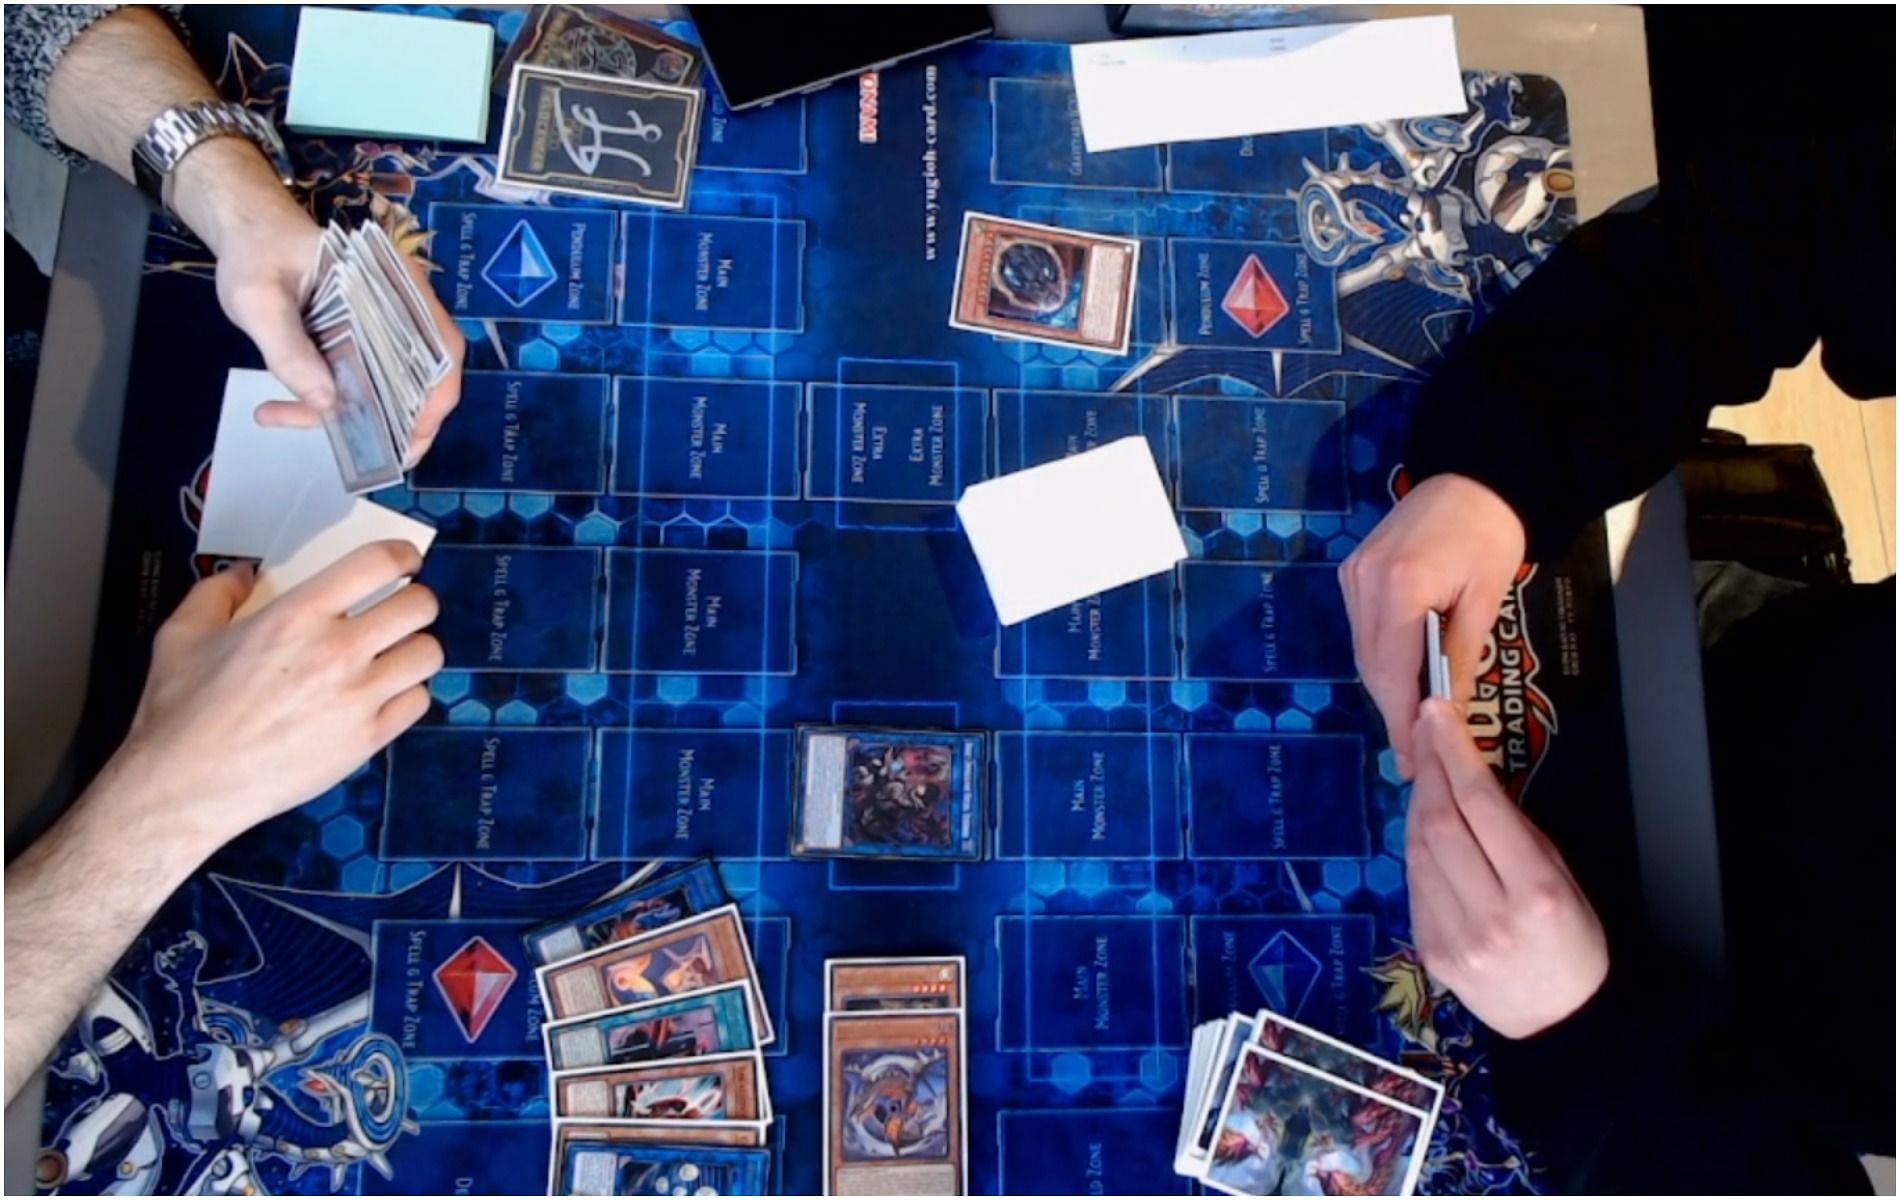 Cadianni, a Yu-Gi-Oh! player, got caught cheating live on Twitch (Image via LudusChampionshipSeries/Twitch)